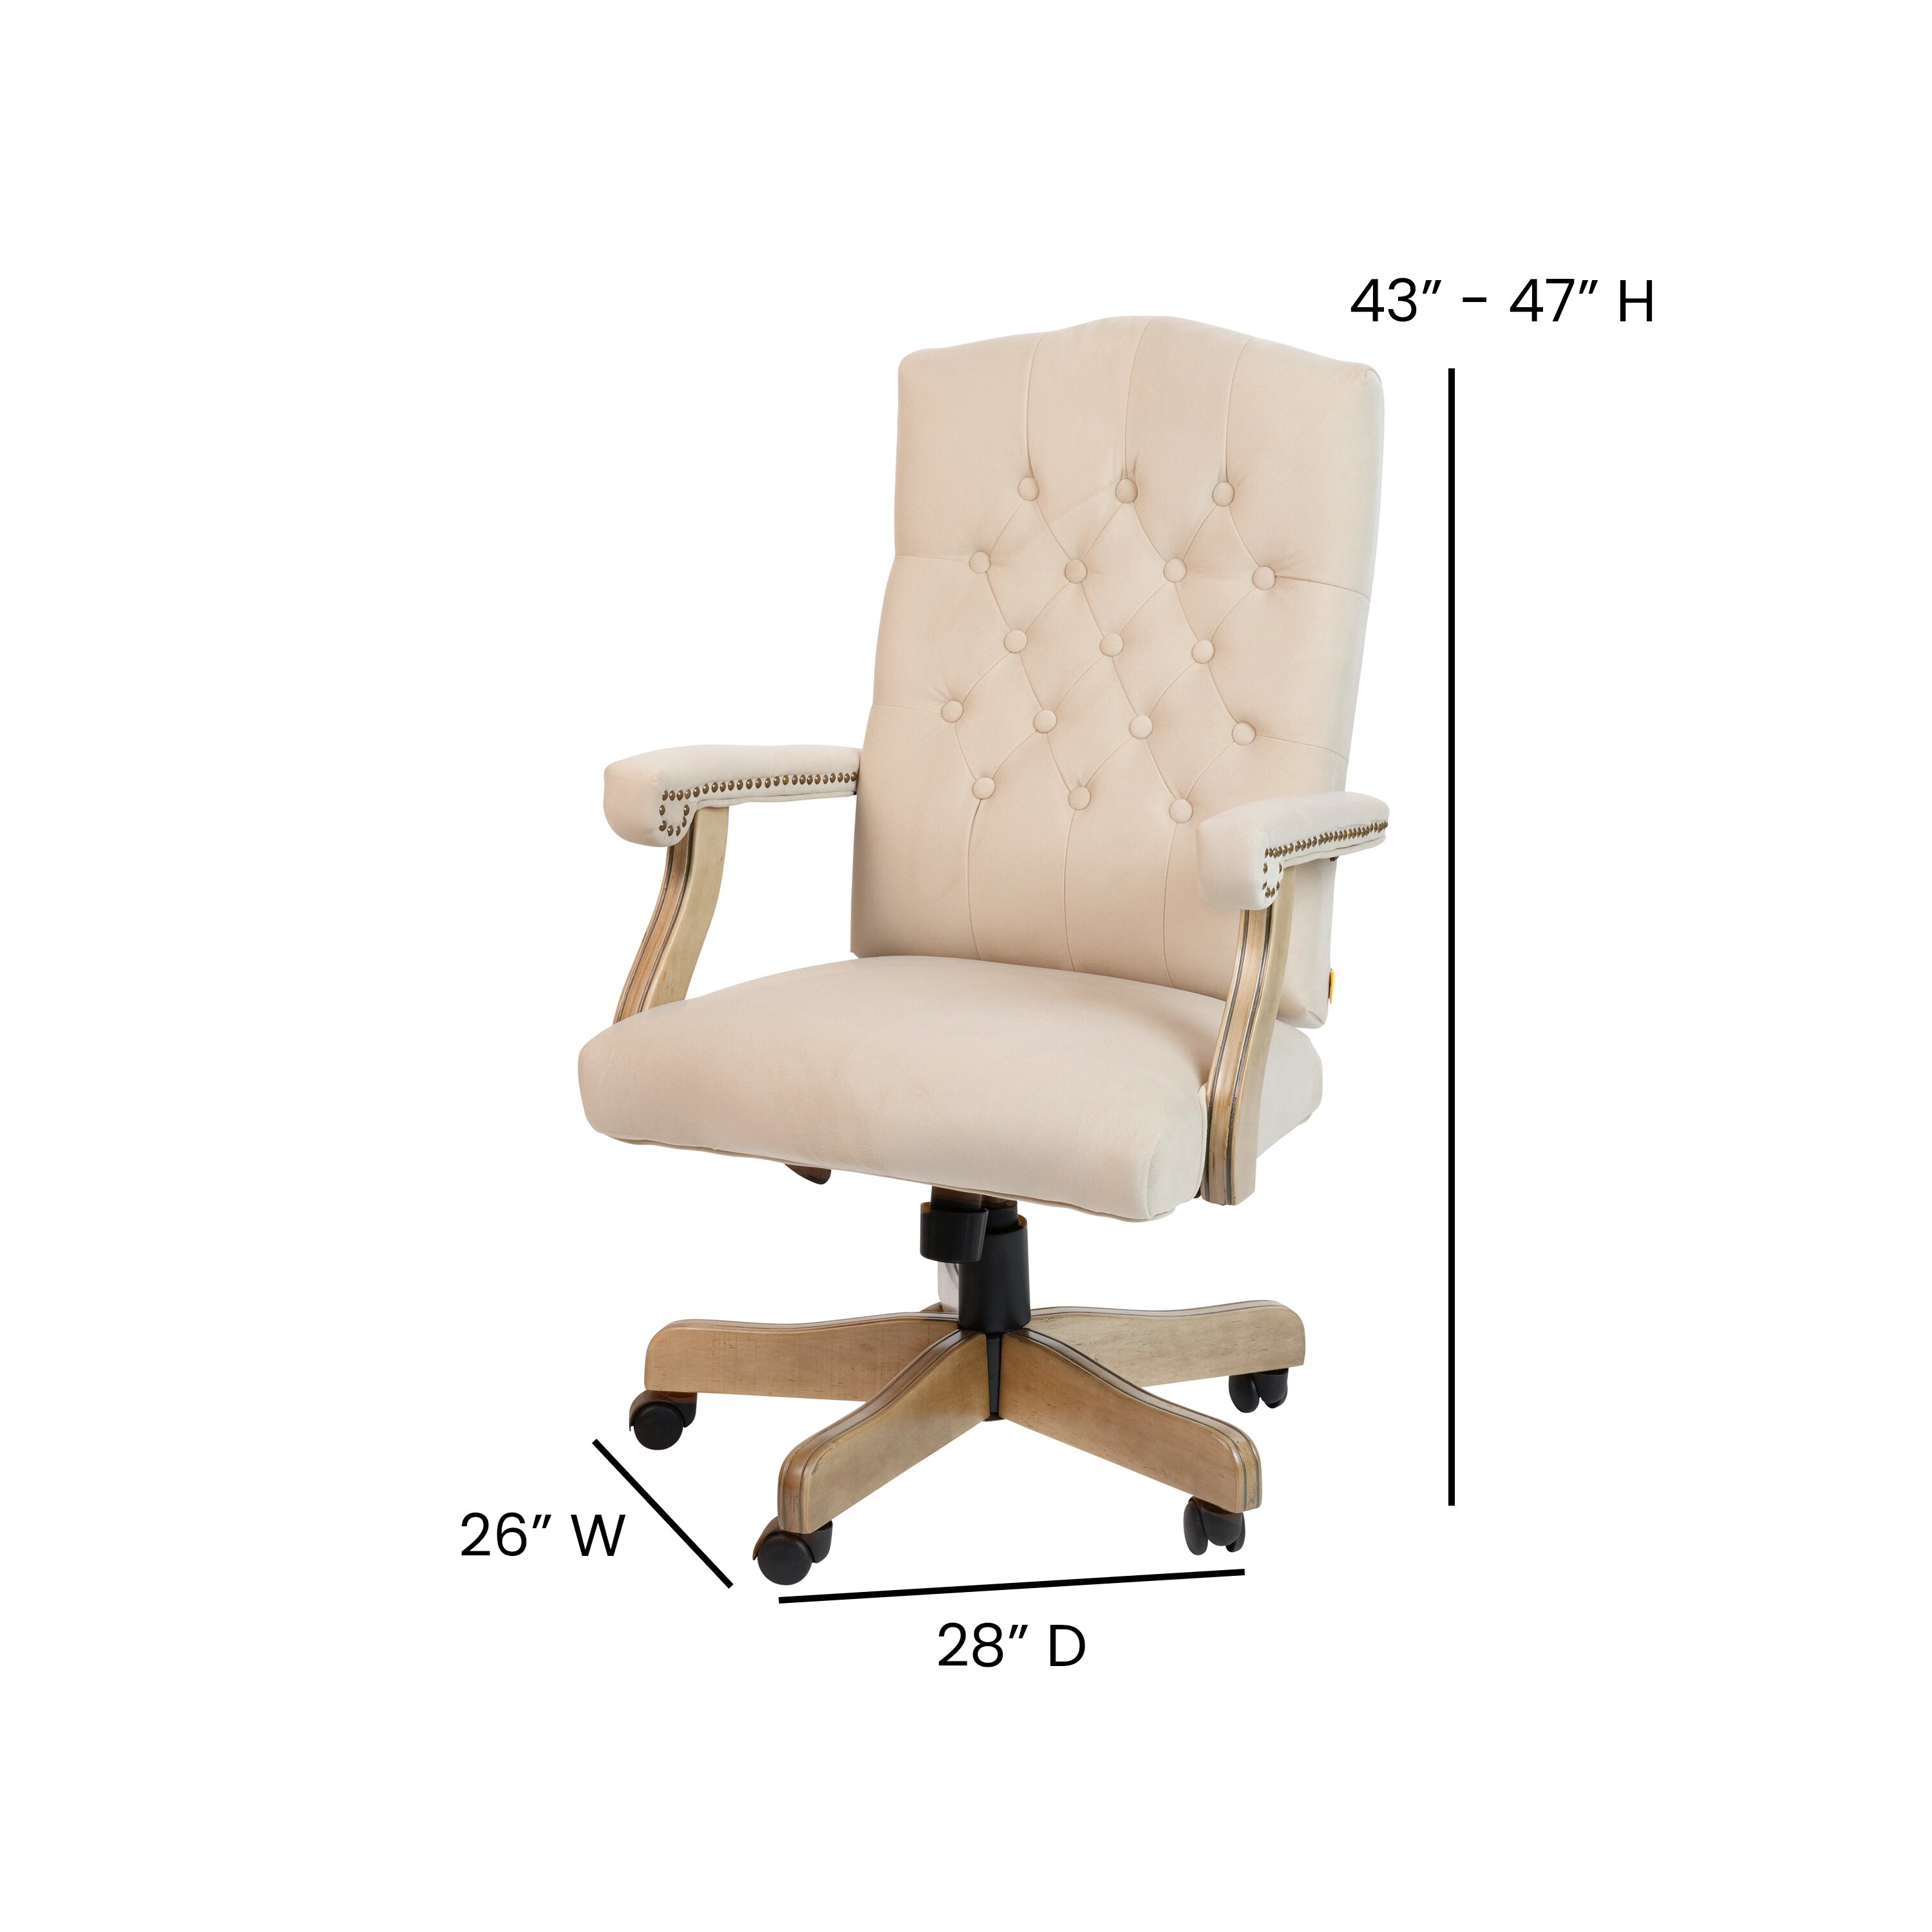 https://ak1.ostkcdn.com/images/products/is/images/direct/cfecde1847e0c48c790707512fb93c5305a573cc/Upholstered-Brown-Swiveling-Executive-Office-Armchair.jpg